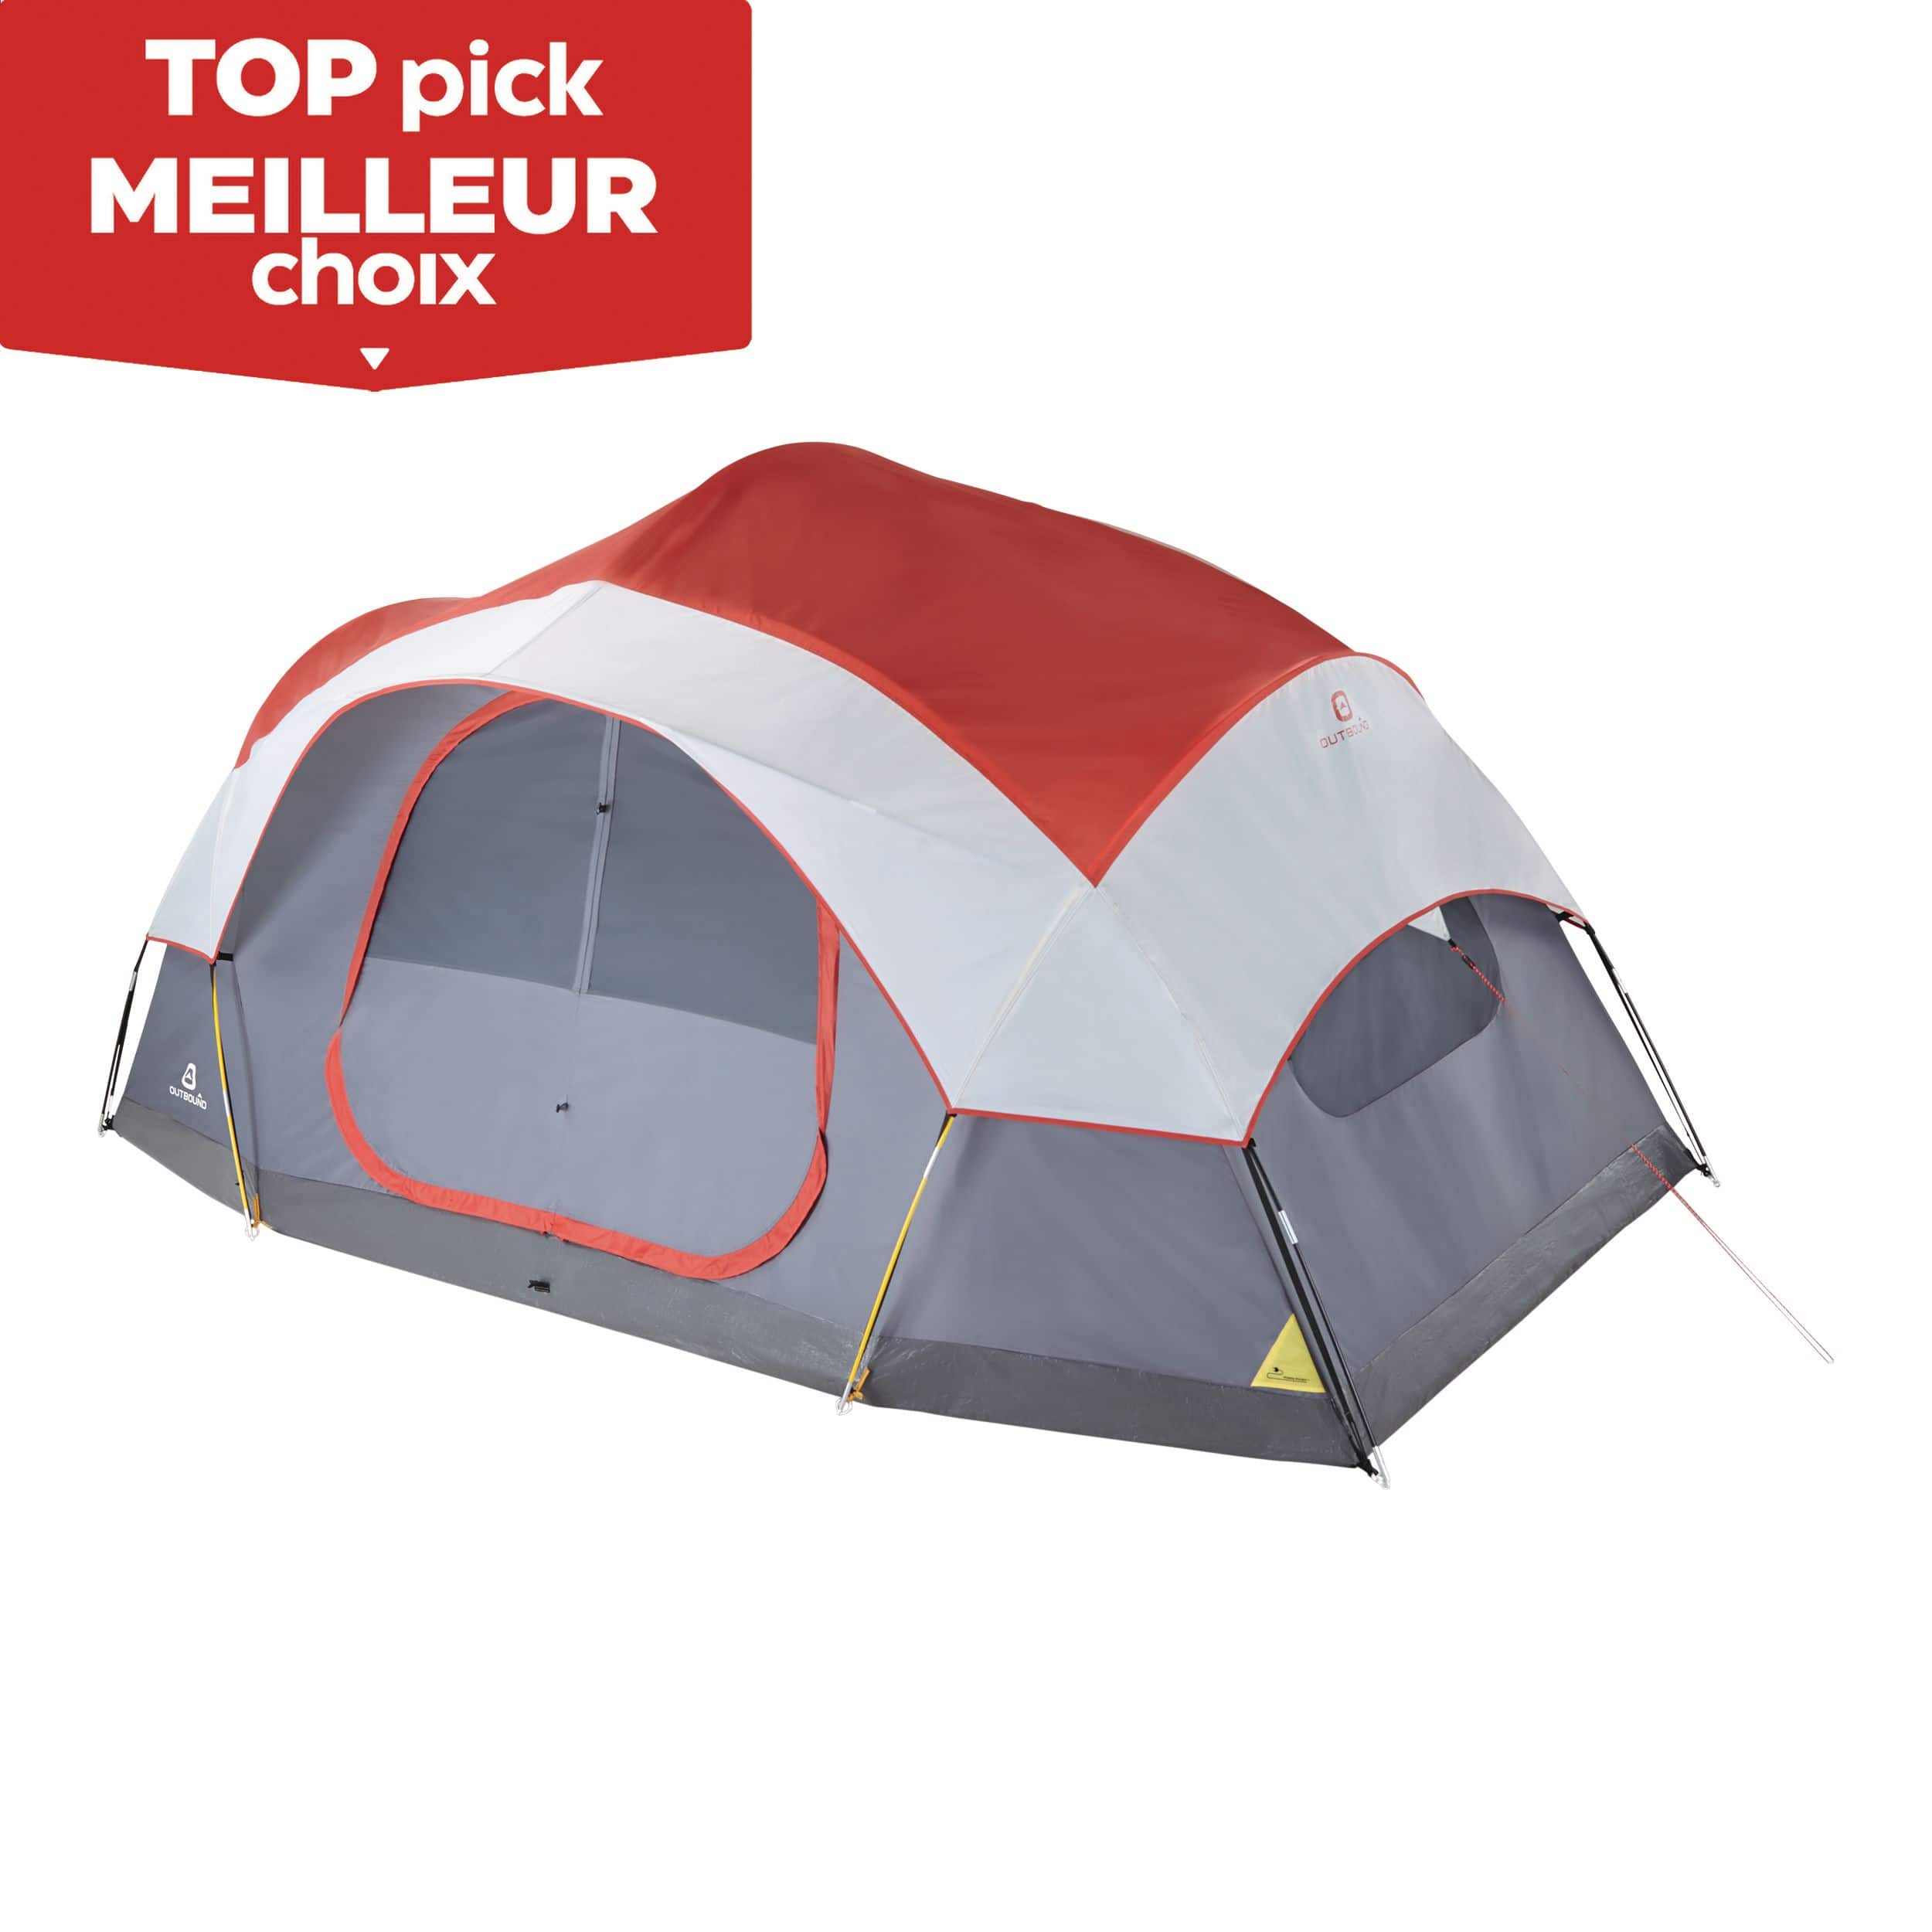 Outbound 3-Season, 8-Person, 2-Room Camping Dome Tent w/ Room